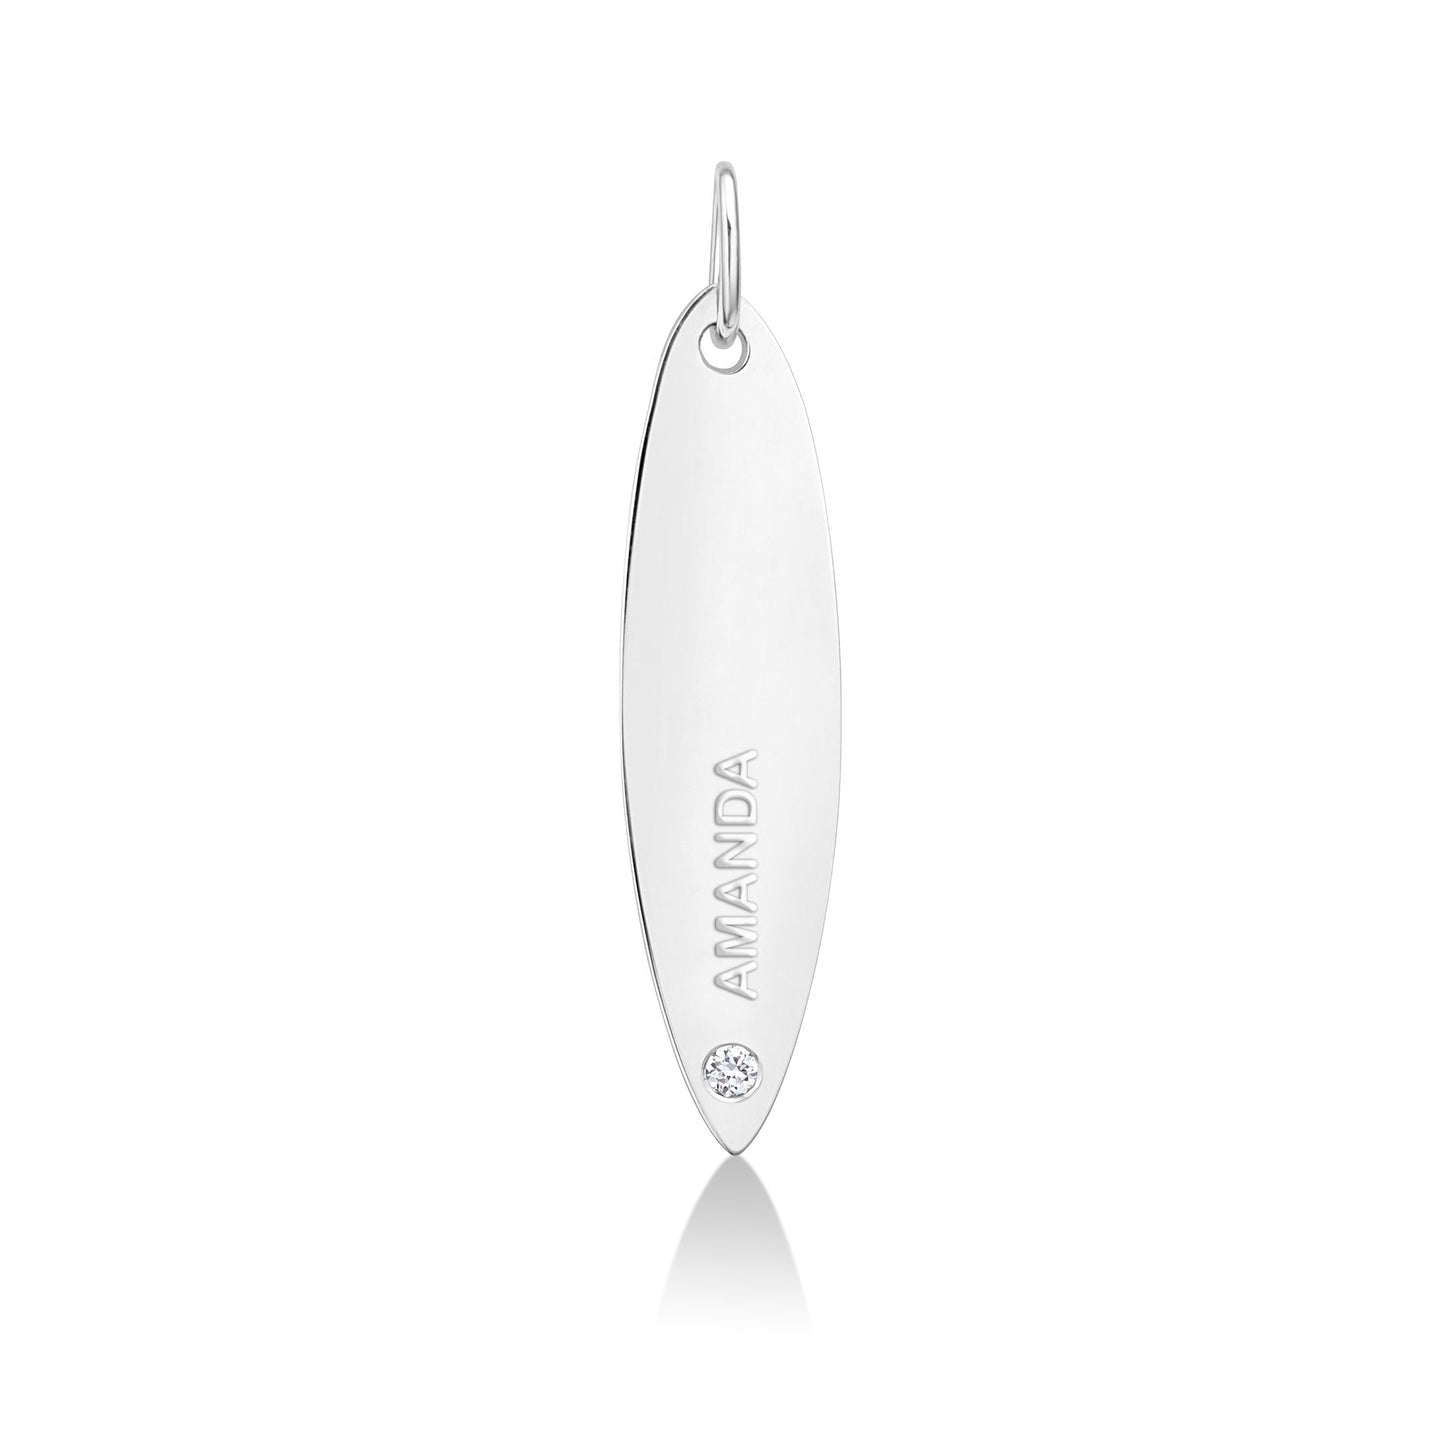 14k white gold surfboard charm lock with AMANDA engraved and diamond